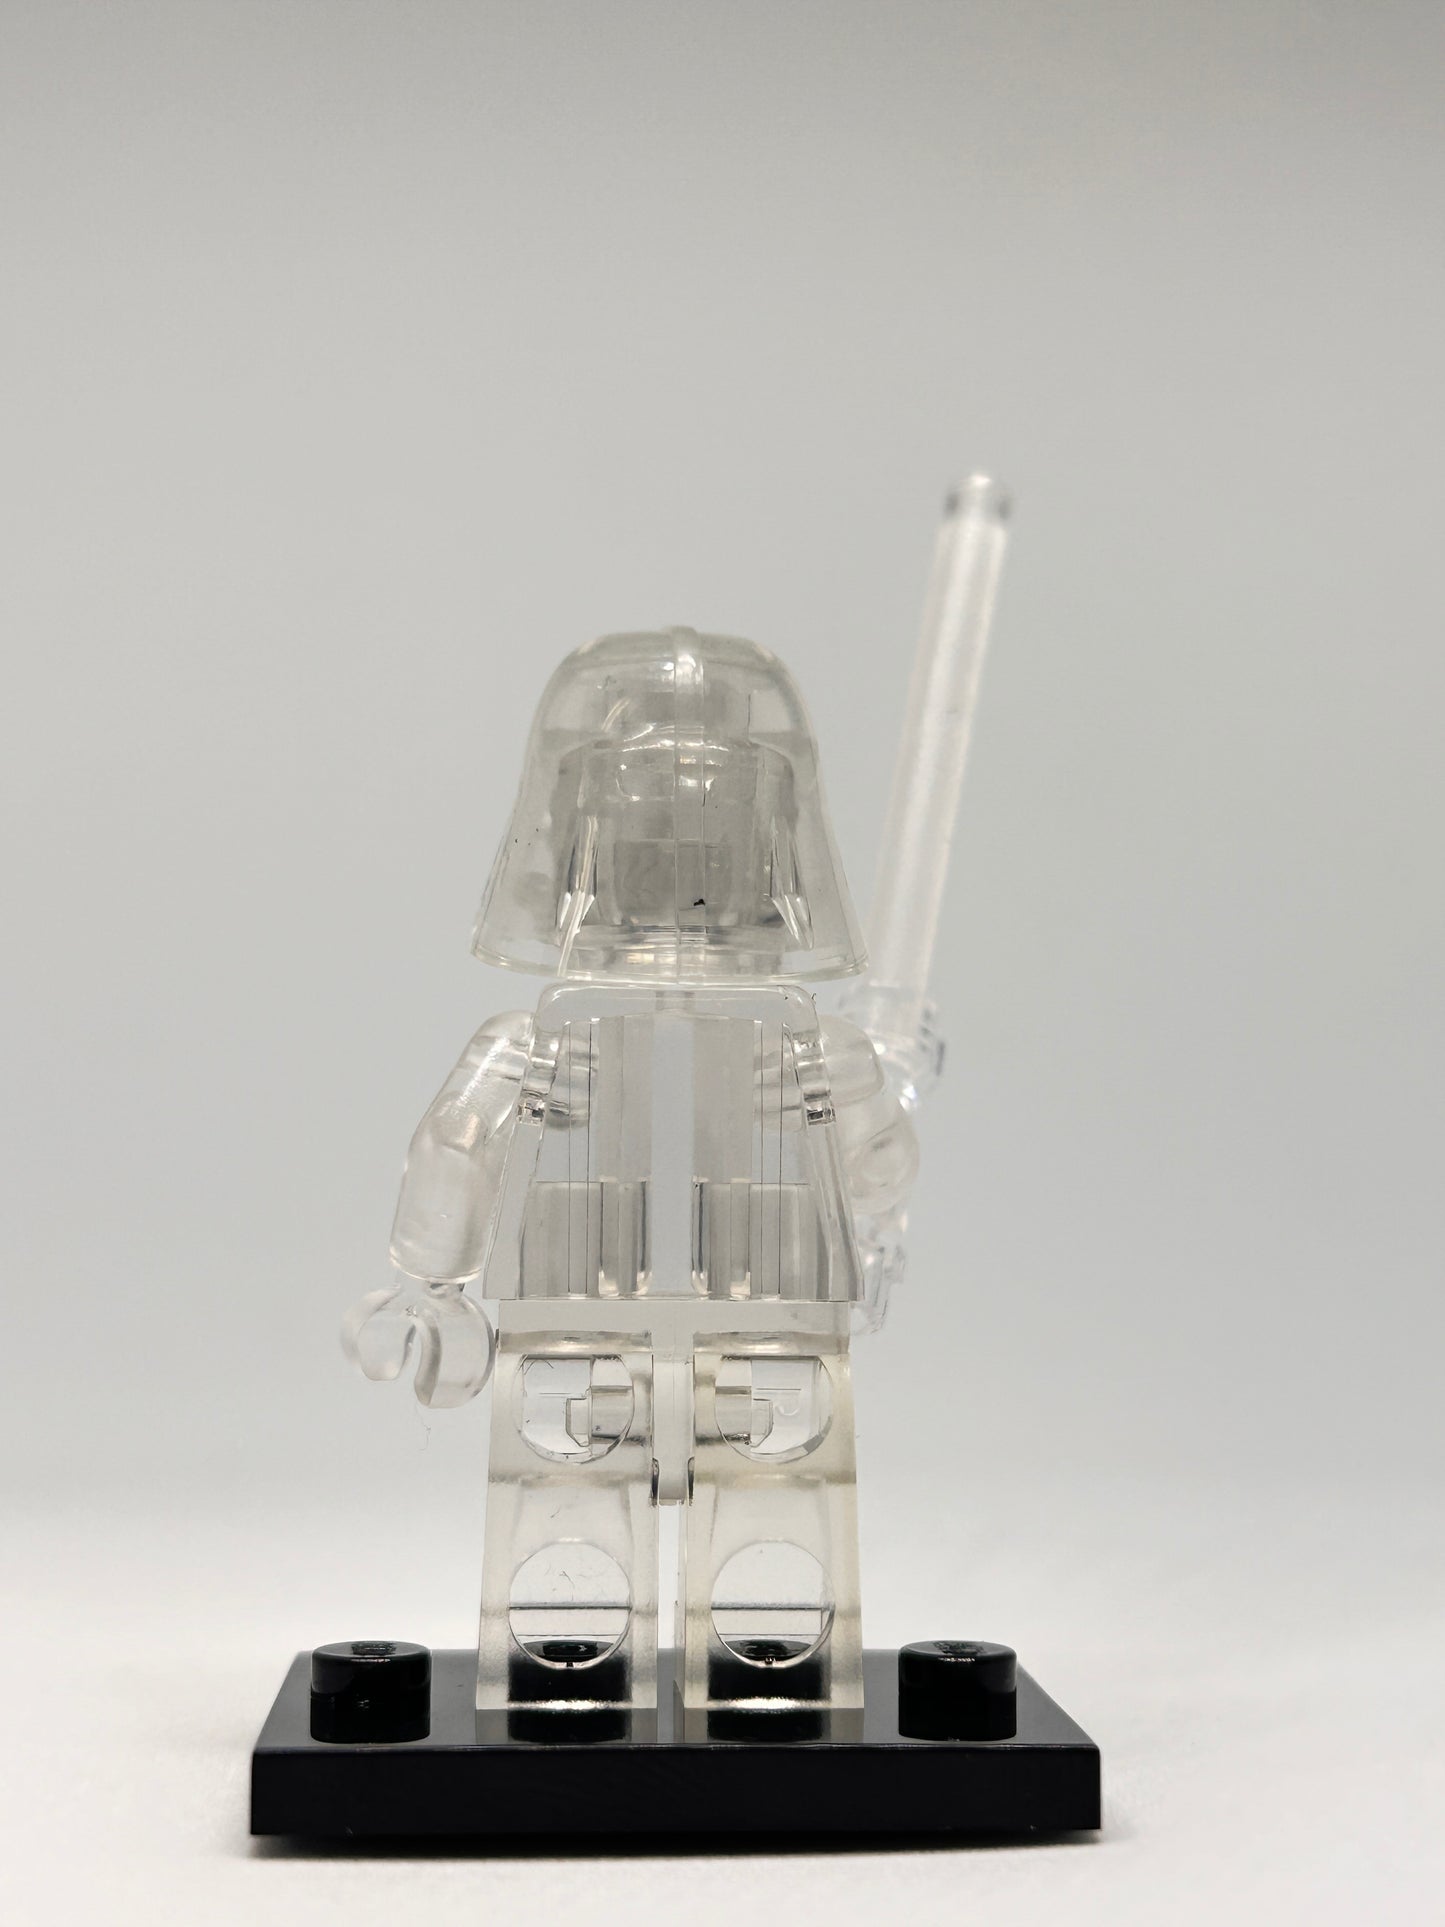 Translucent Dark Vader Prototype - multiple colors available